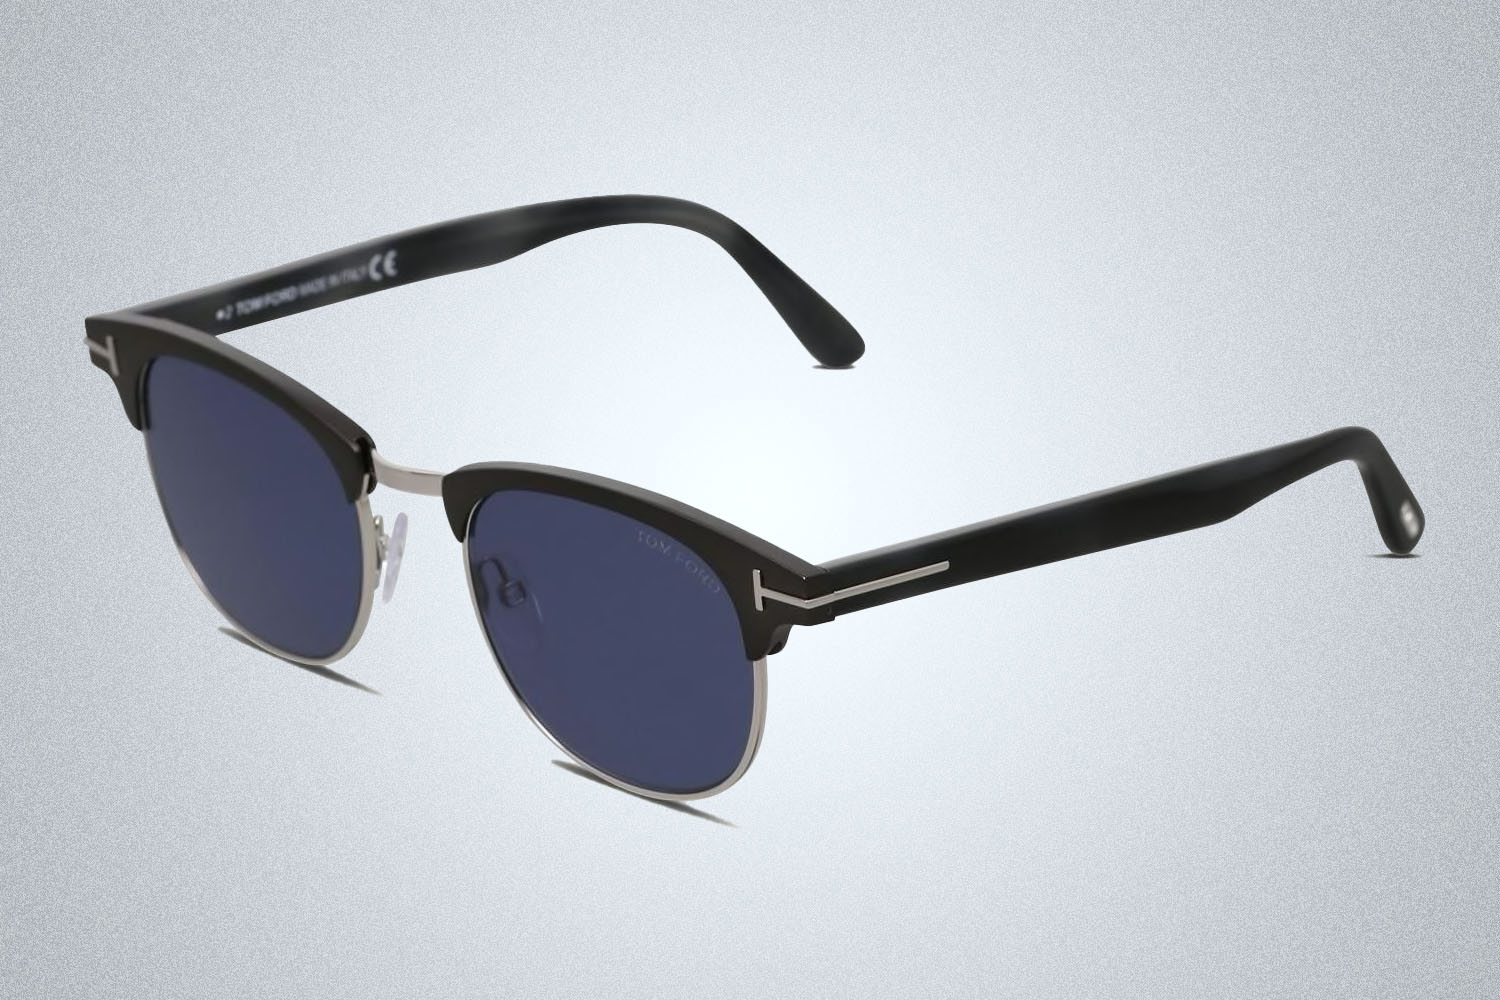 a pair of designer sunglasses from Tom Ford on a grey background